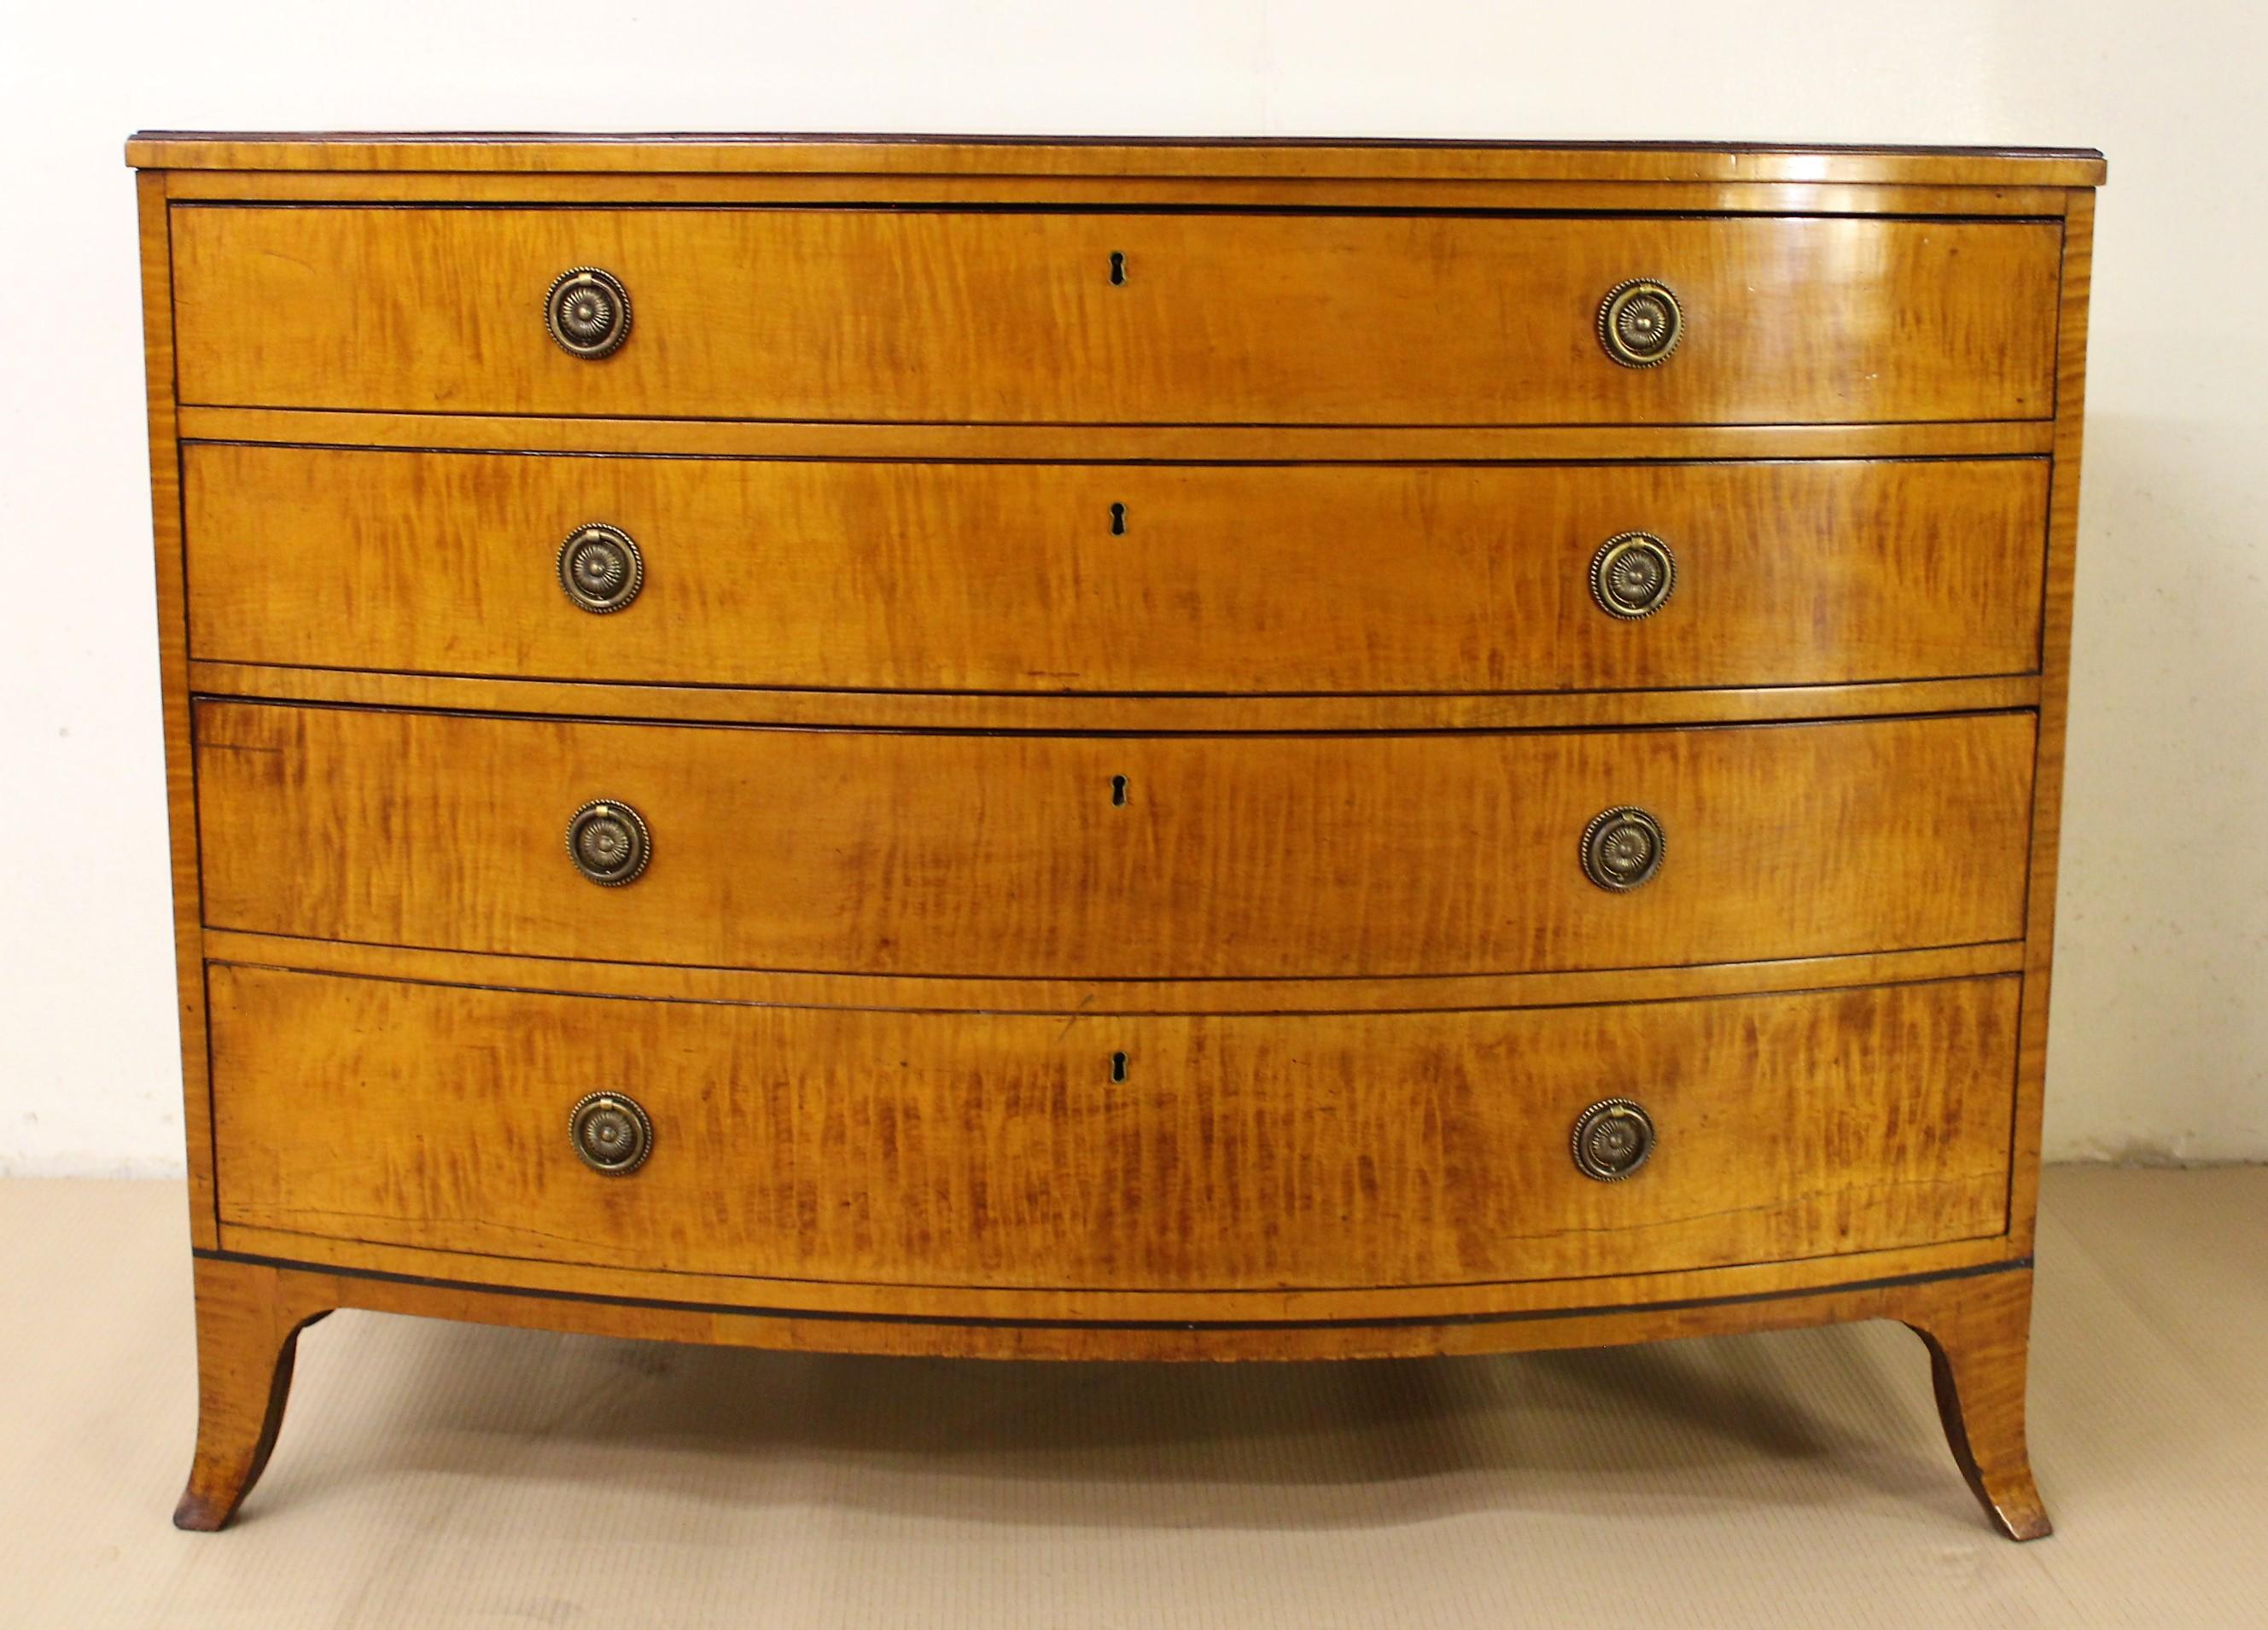 English George III Satinwood Bow Fronted Chest Commode, circa 1790 (Englisch)